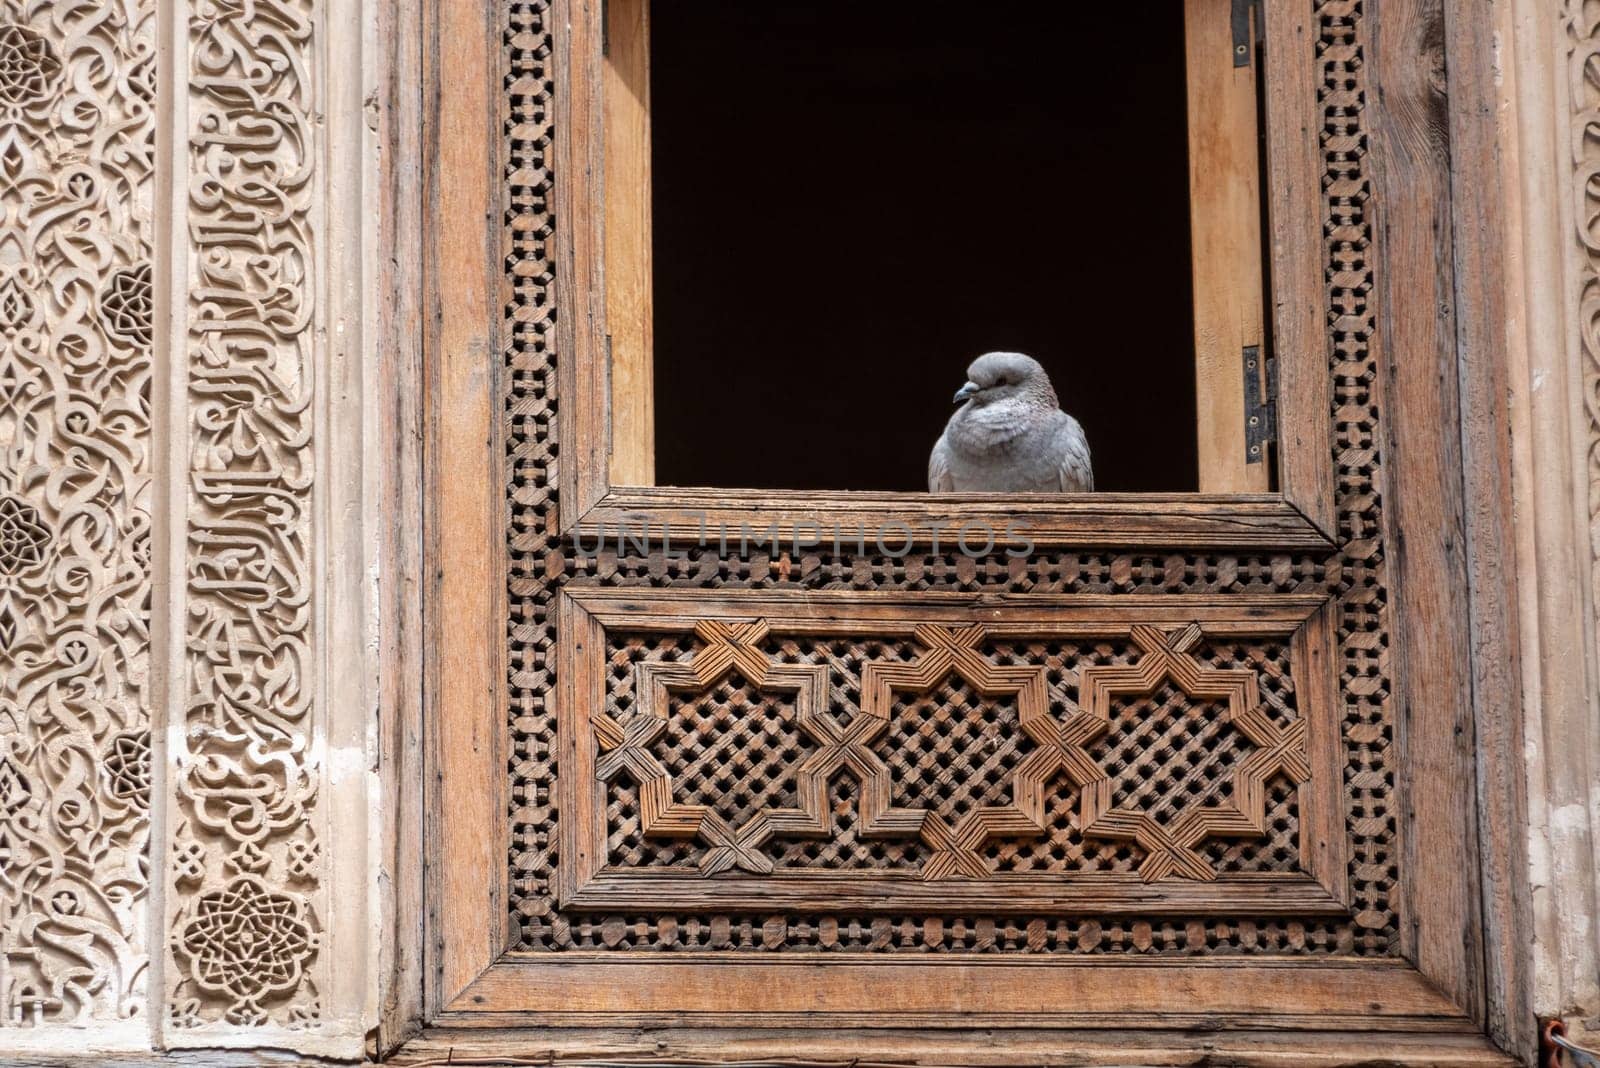 Rich decorated facade in the courtyard of the Medersa Attarine in Fes, Morocco